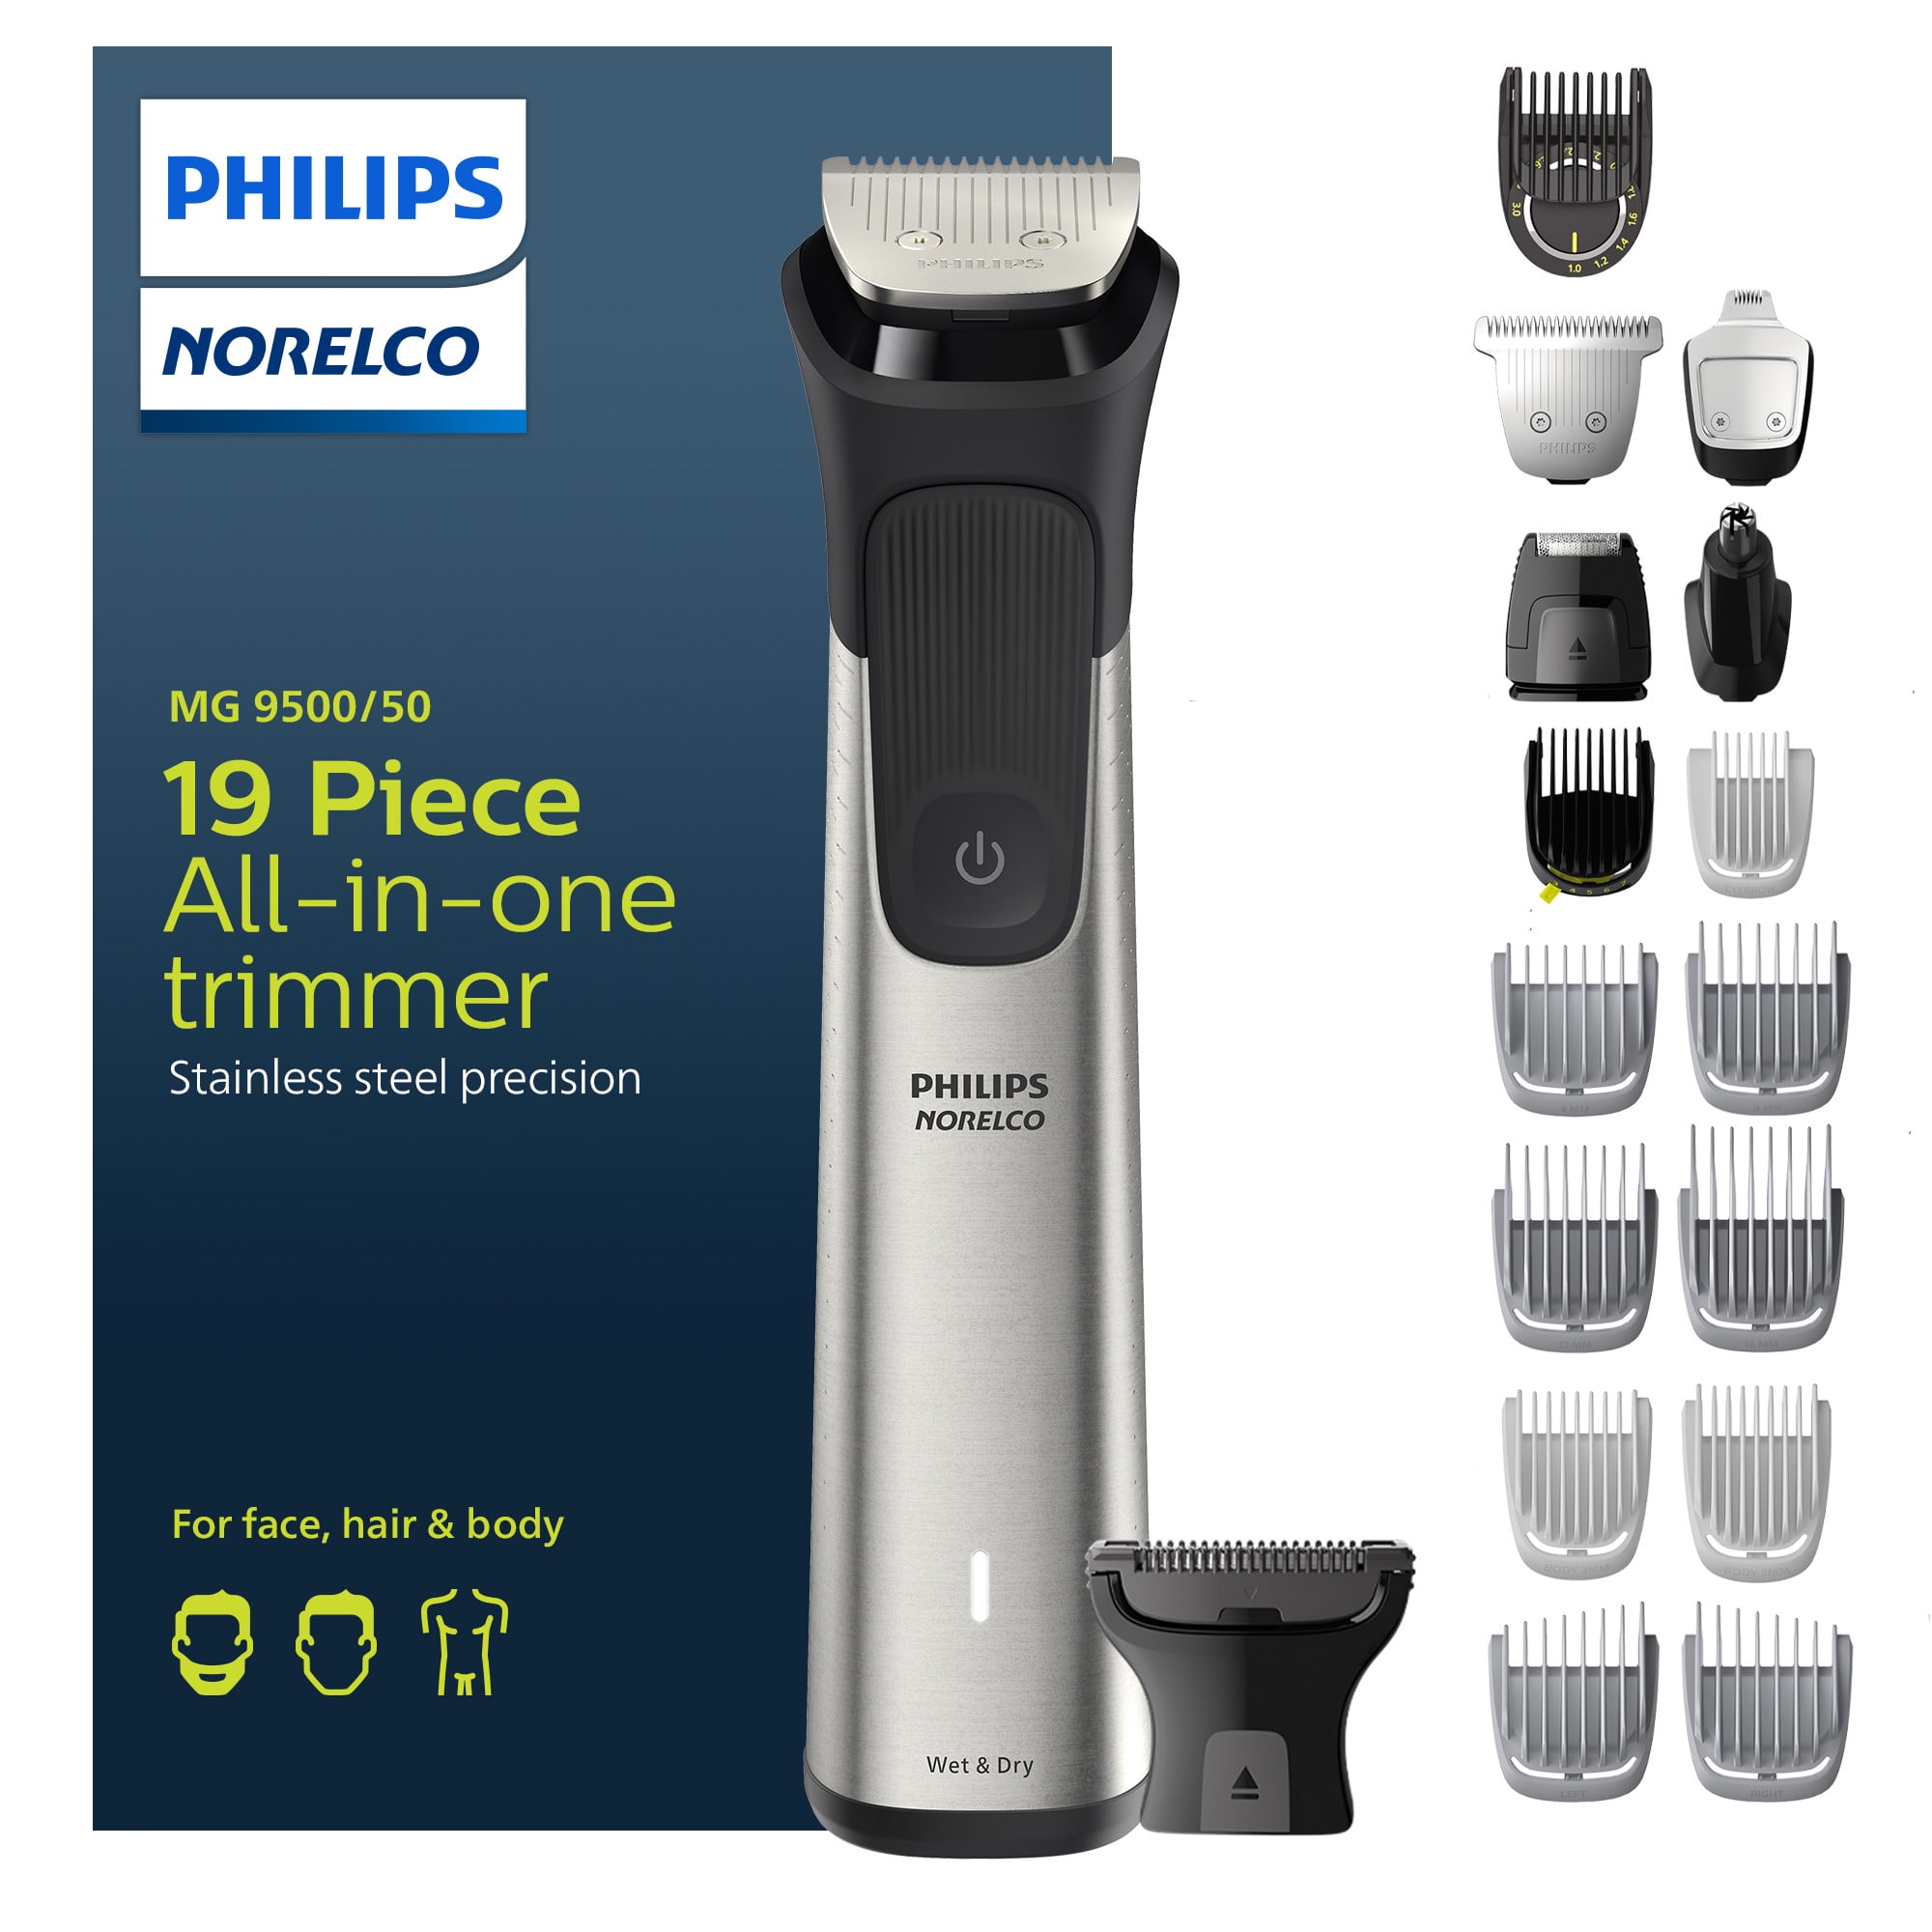 Tested Clippers Cordless Hair Barbers Best Men, The for Professional by